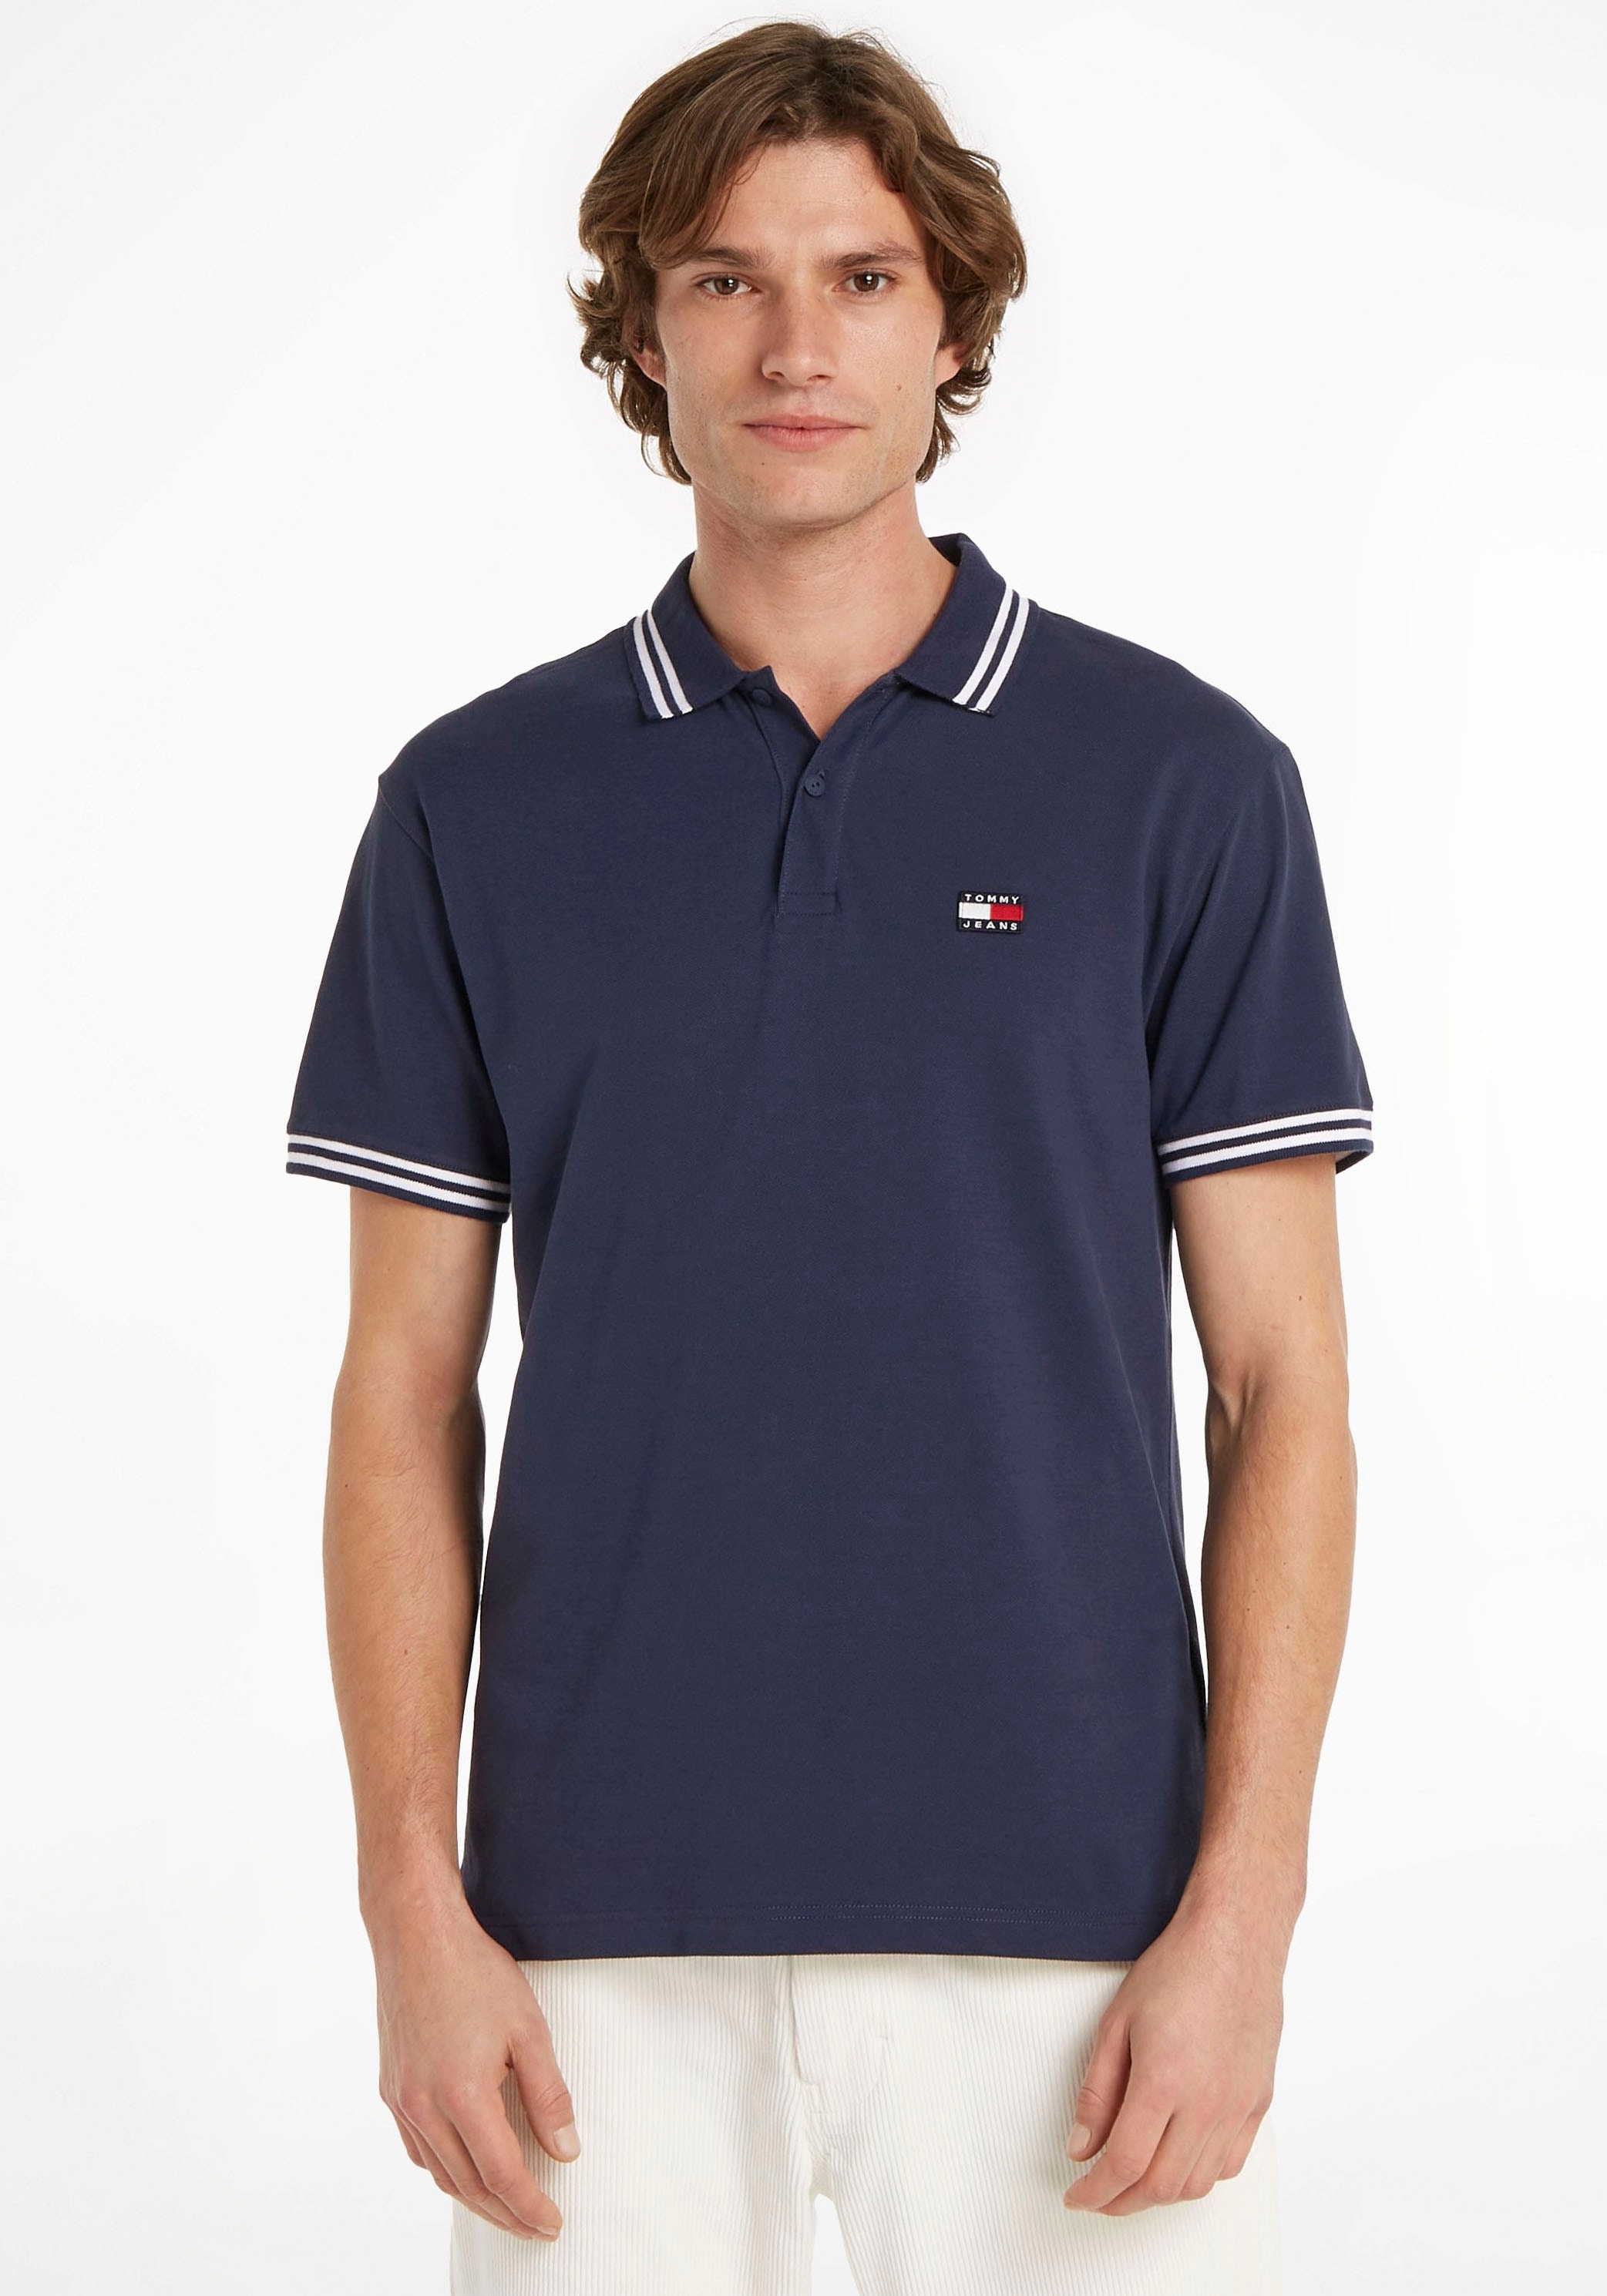 Tommy Jeans Poloshirt »TJM TIPPING DETAIL bei CLSC OTTO POLO« shoppen online